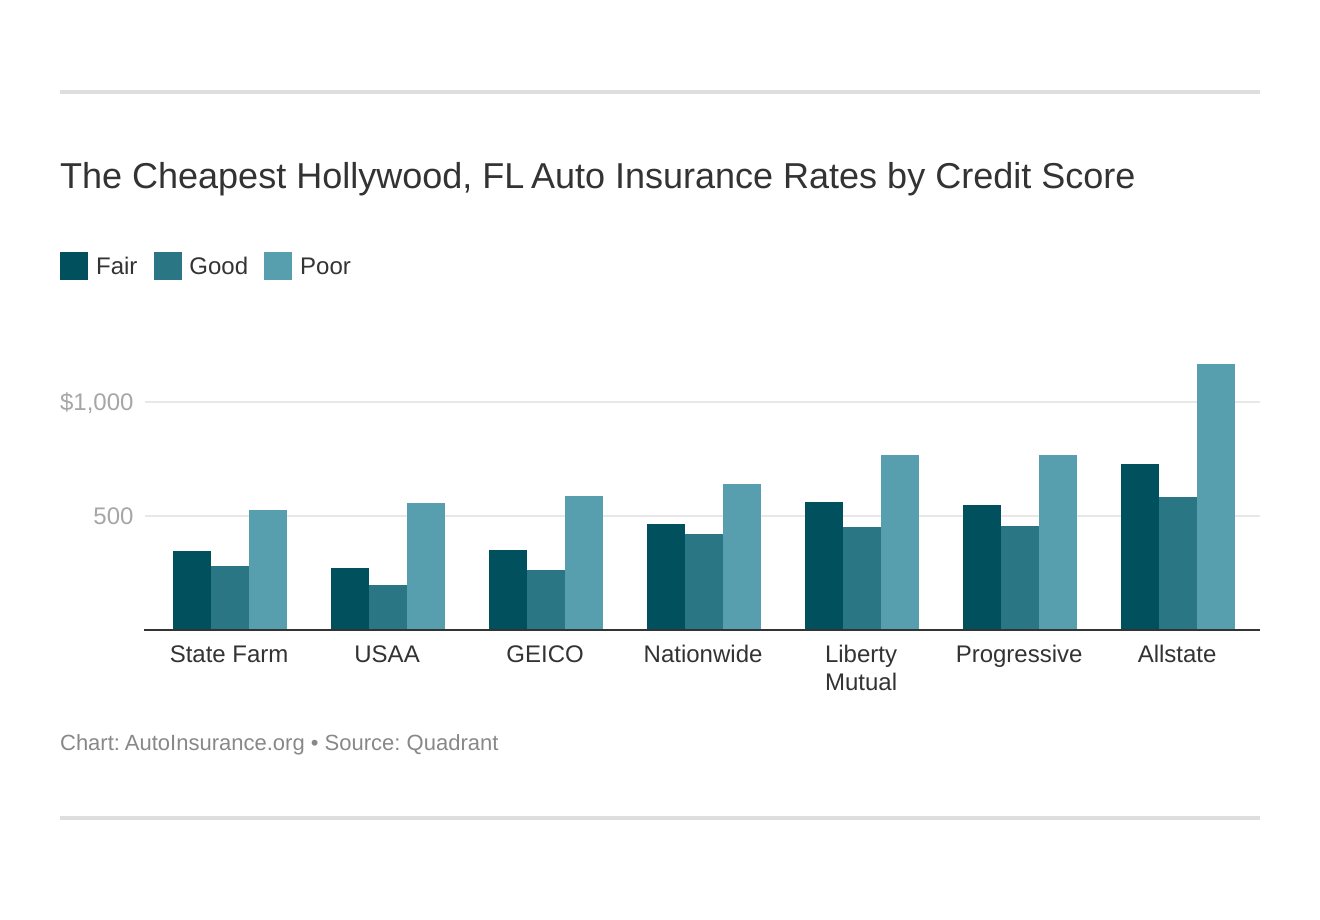 The Cheapest Hollywood, FL Auto Insurance Rates by Credit Score